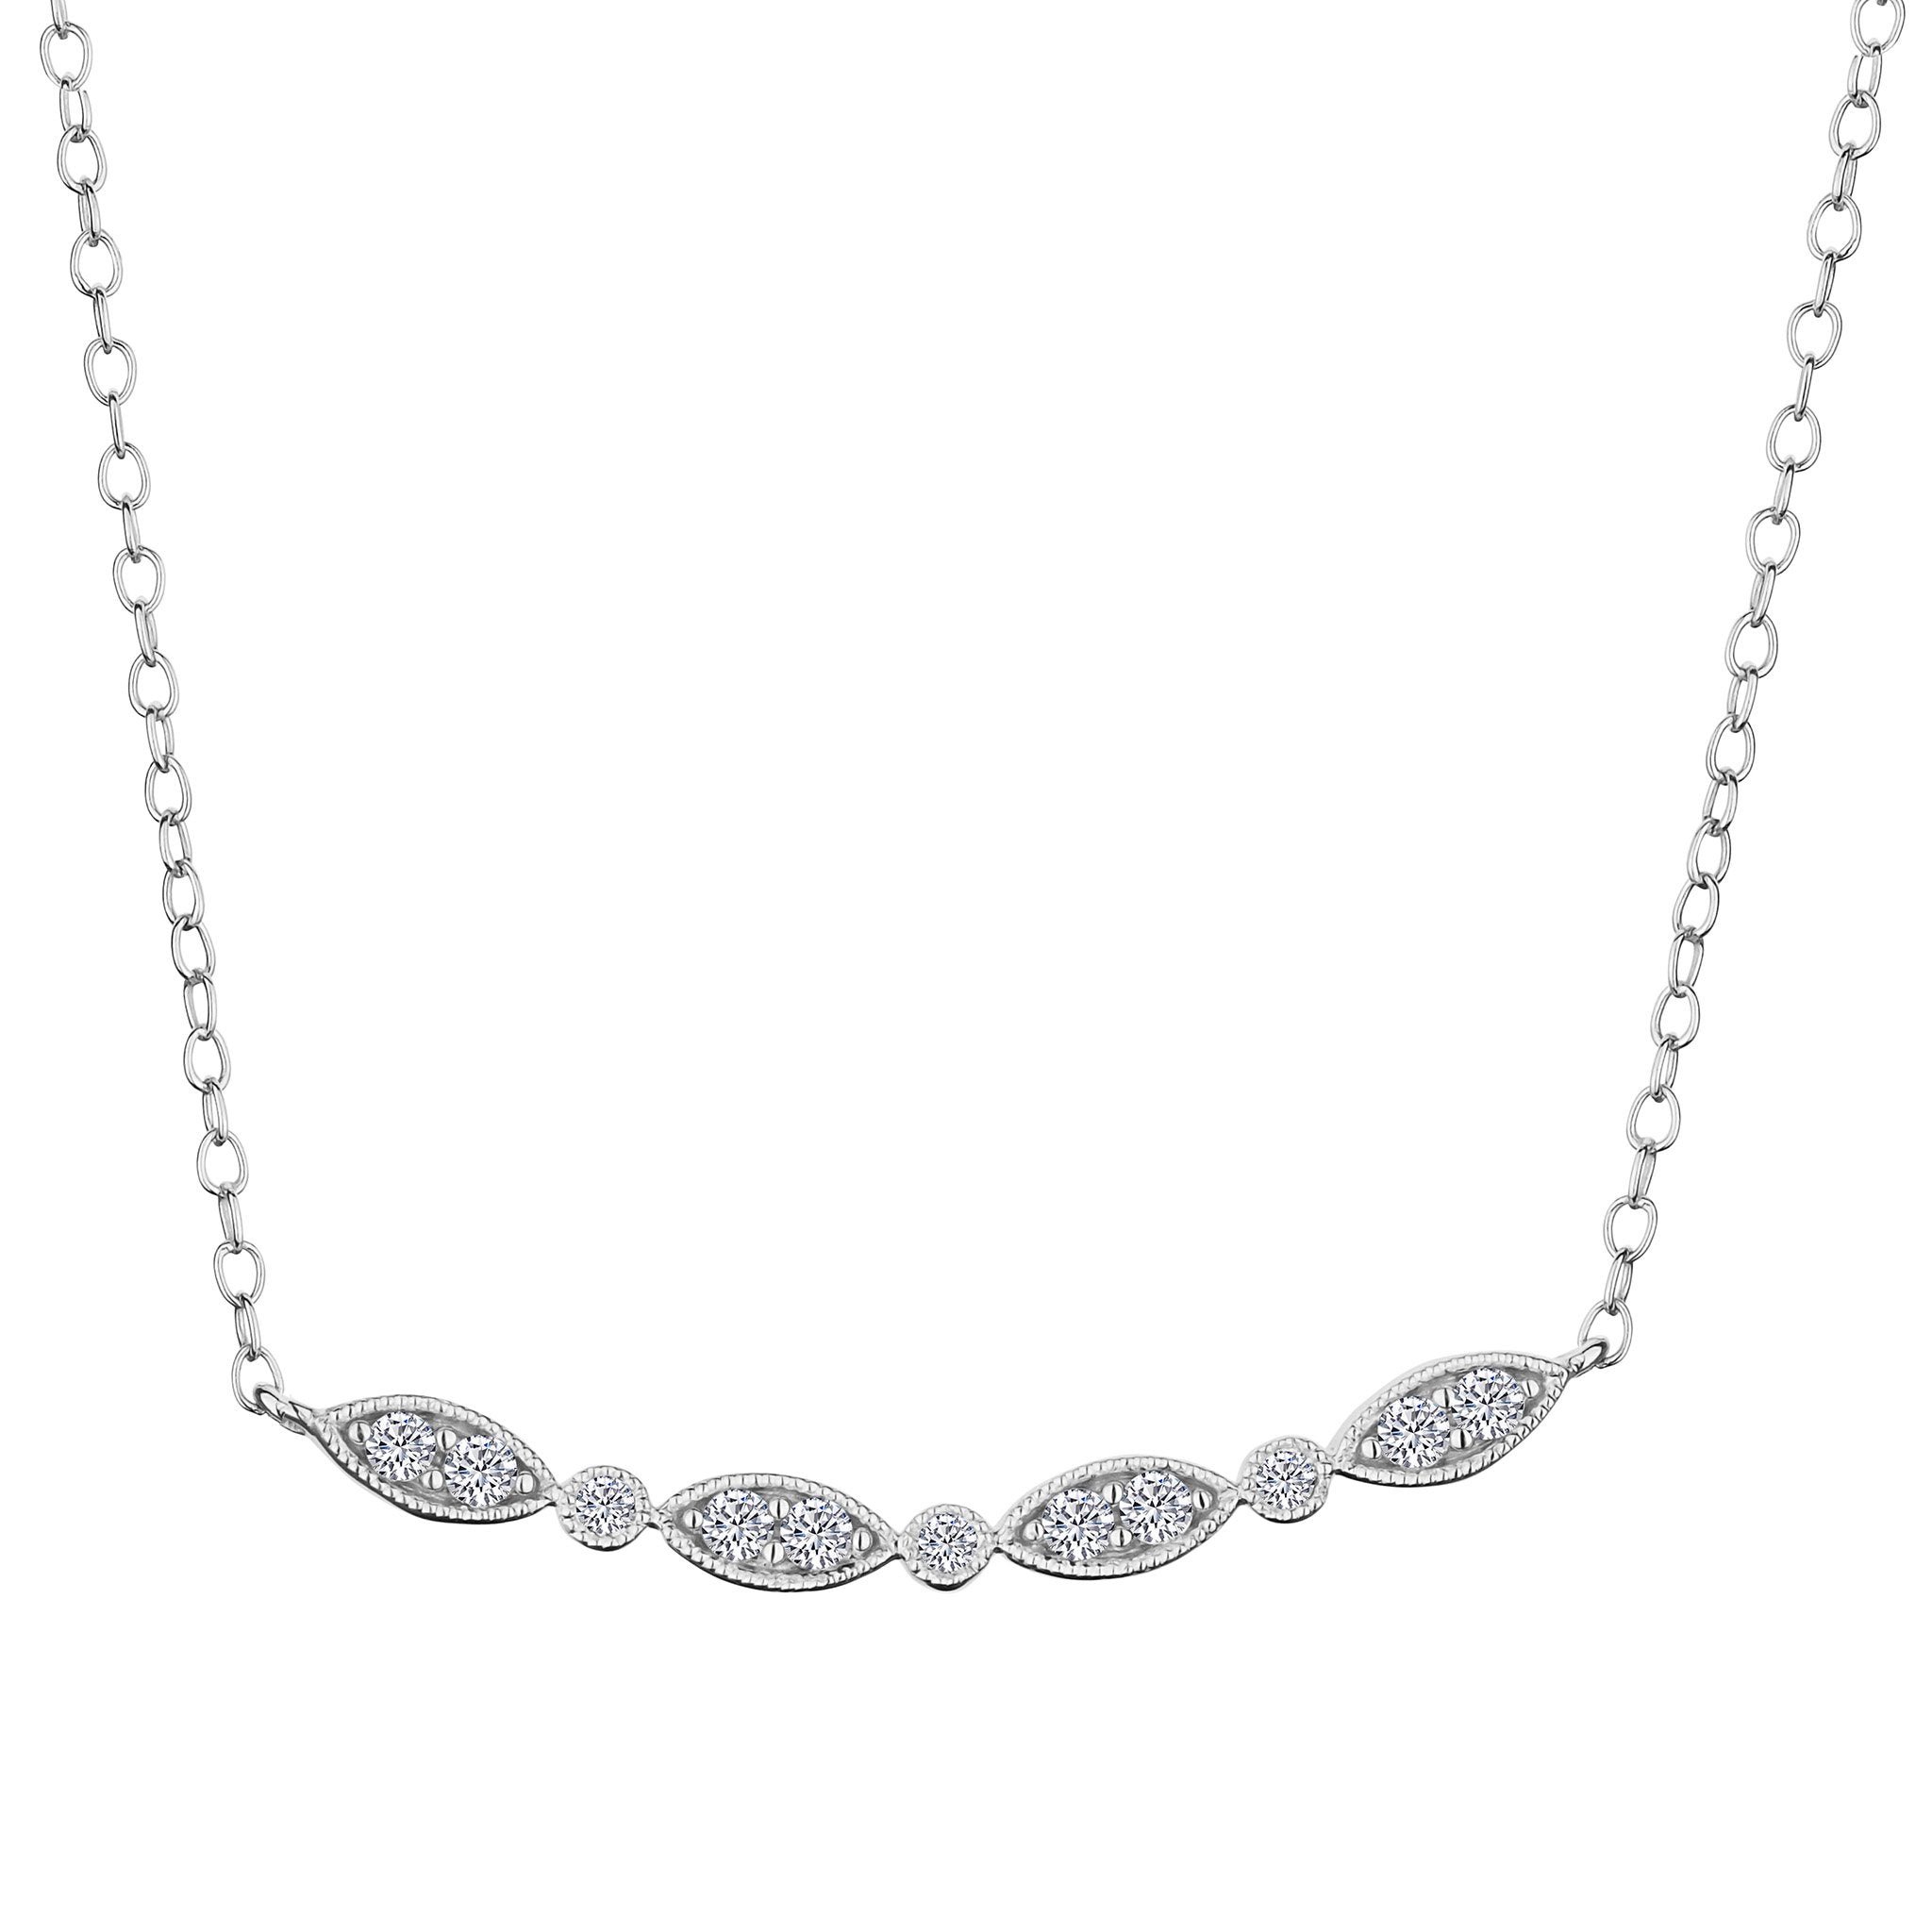 .16 Carat Diamond Necklace,  10kt White Gold. Necklaces and Pendants. Griffin Jewellery Designs.